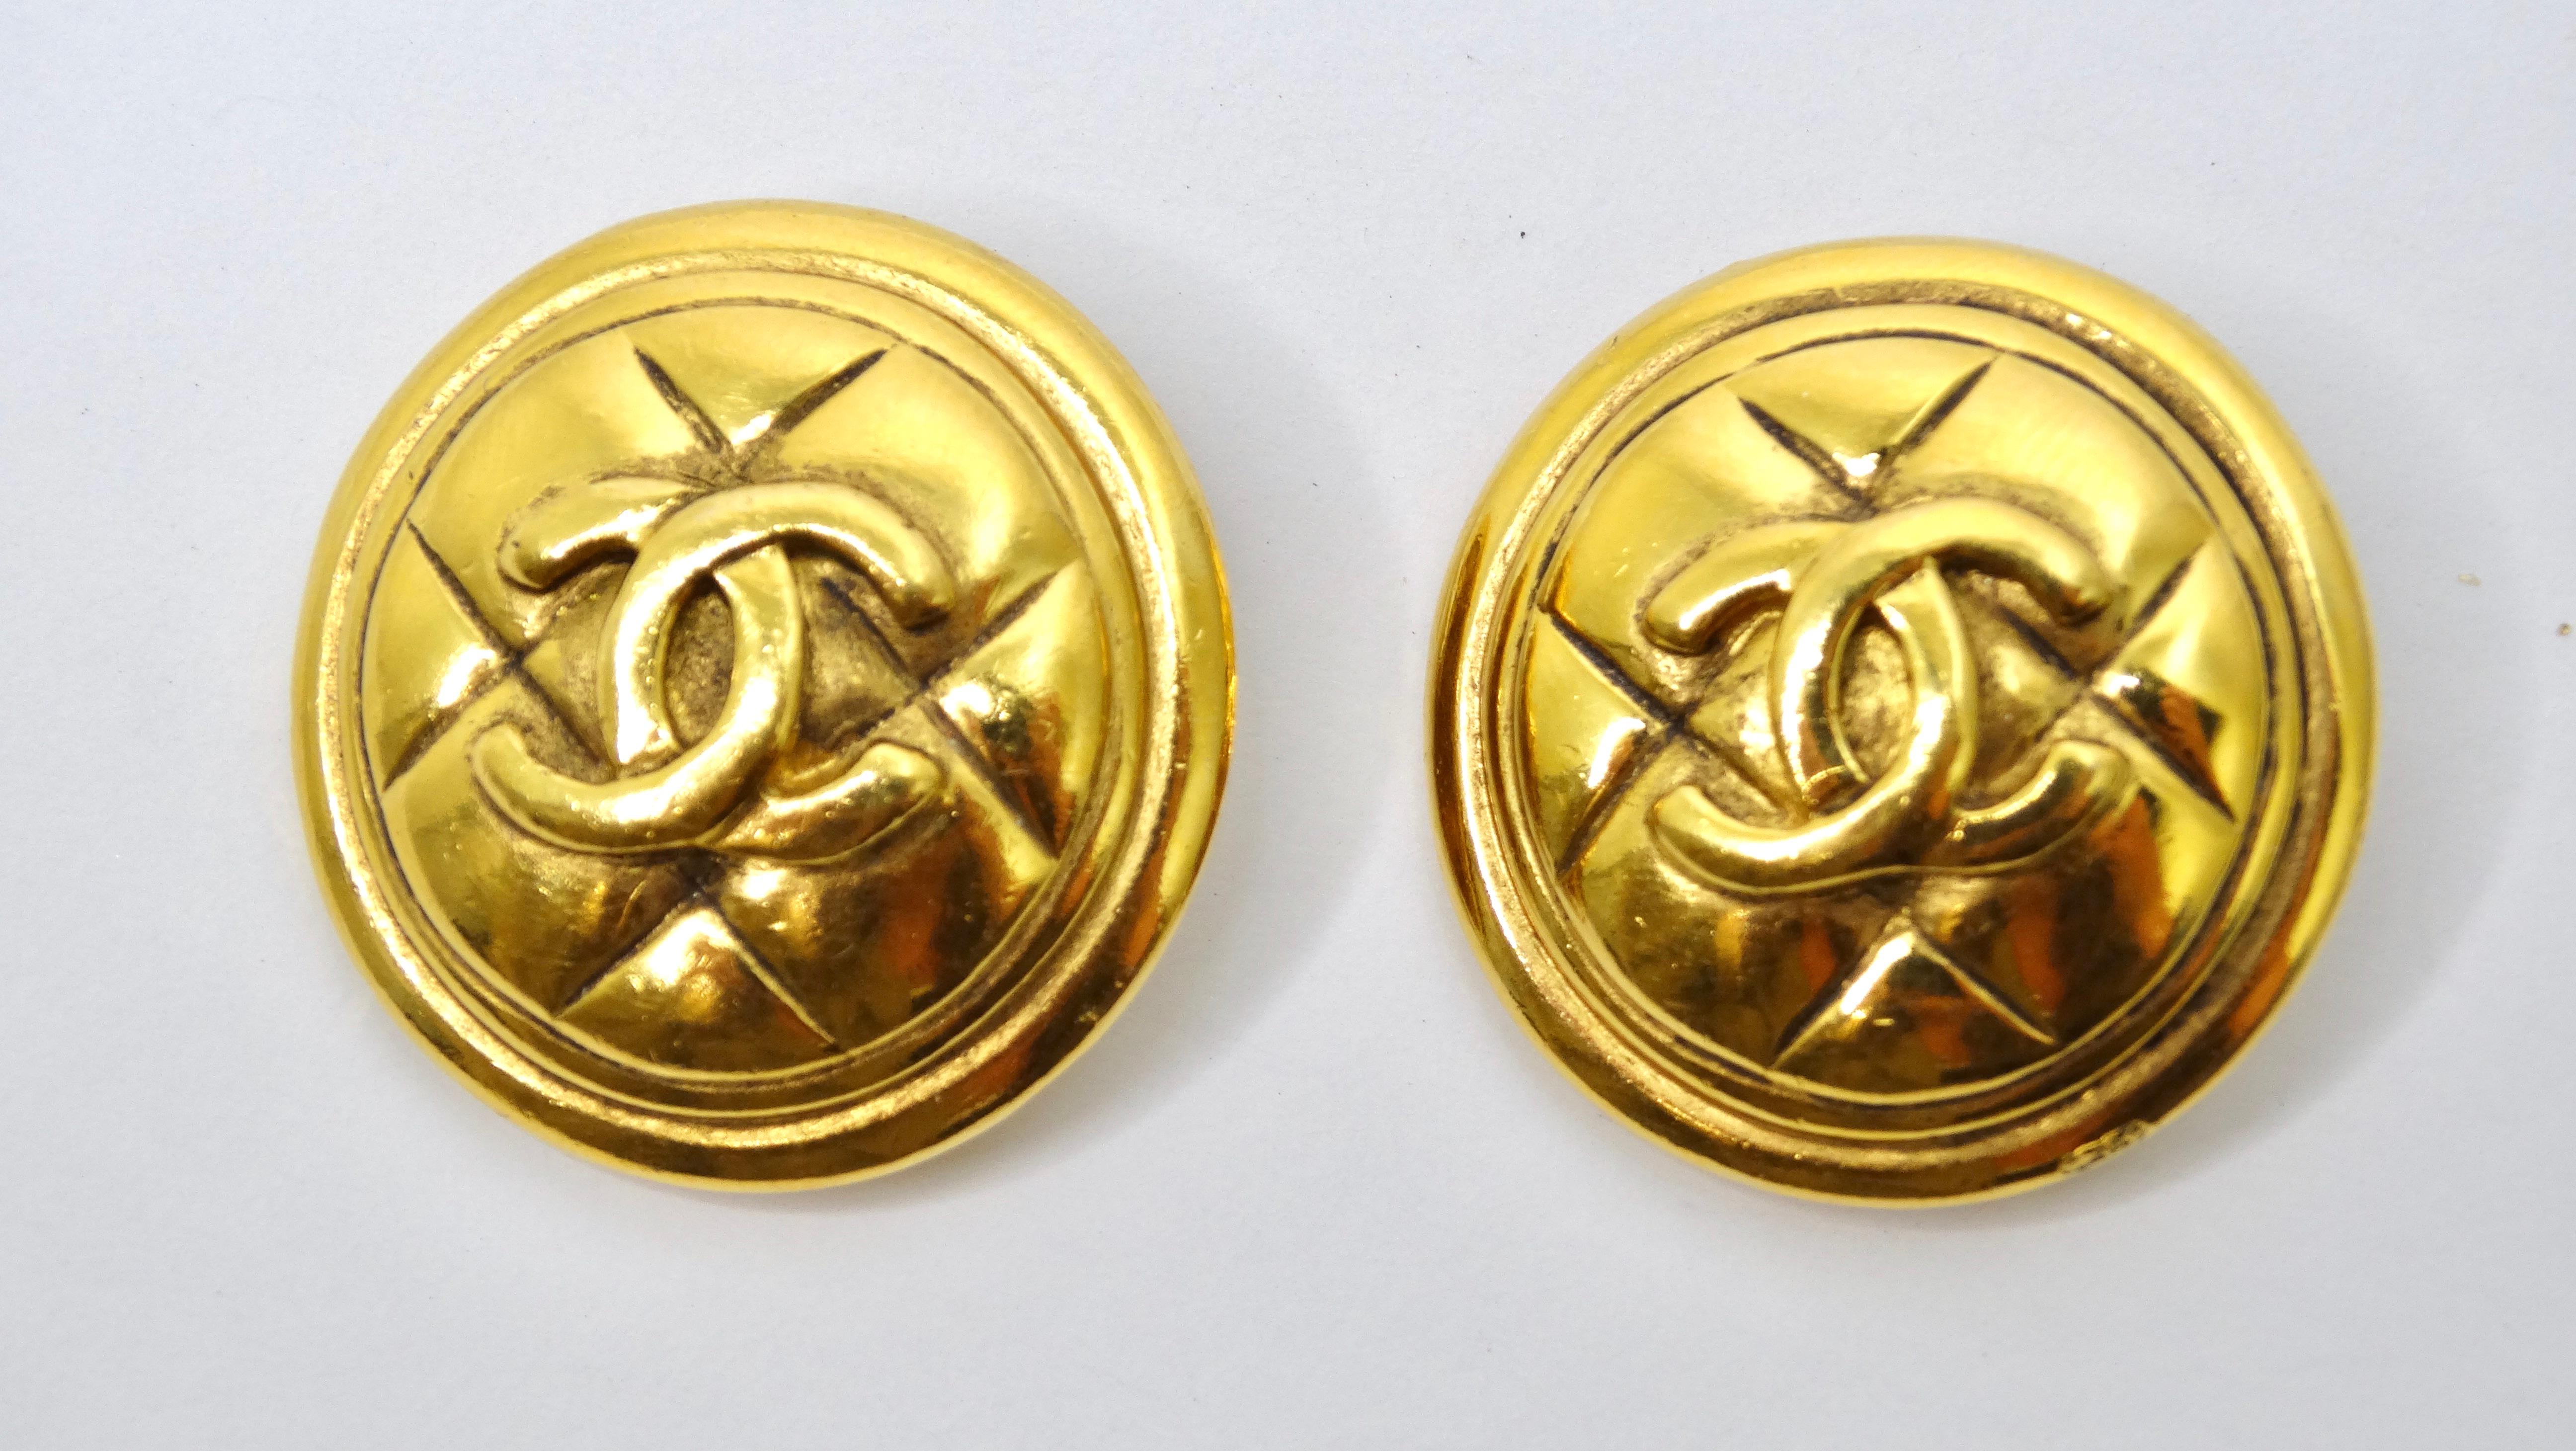  Chanel 1990's 'Quilted' Gold Earrings In Excellent Condition For Sale In Scottsdale, AZ